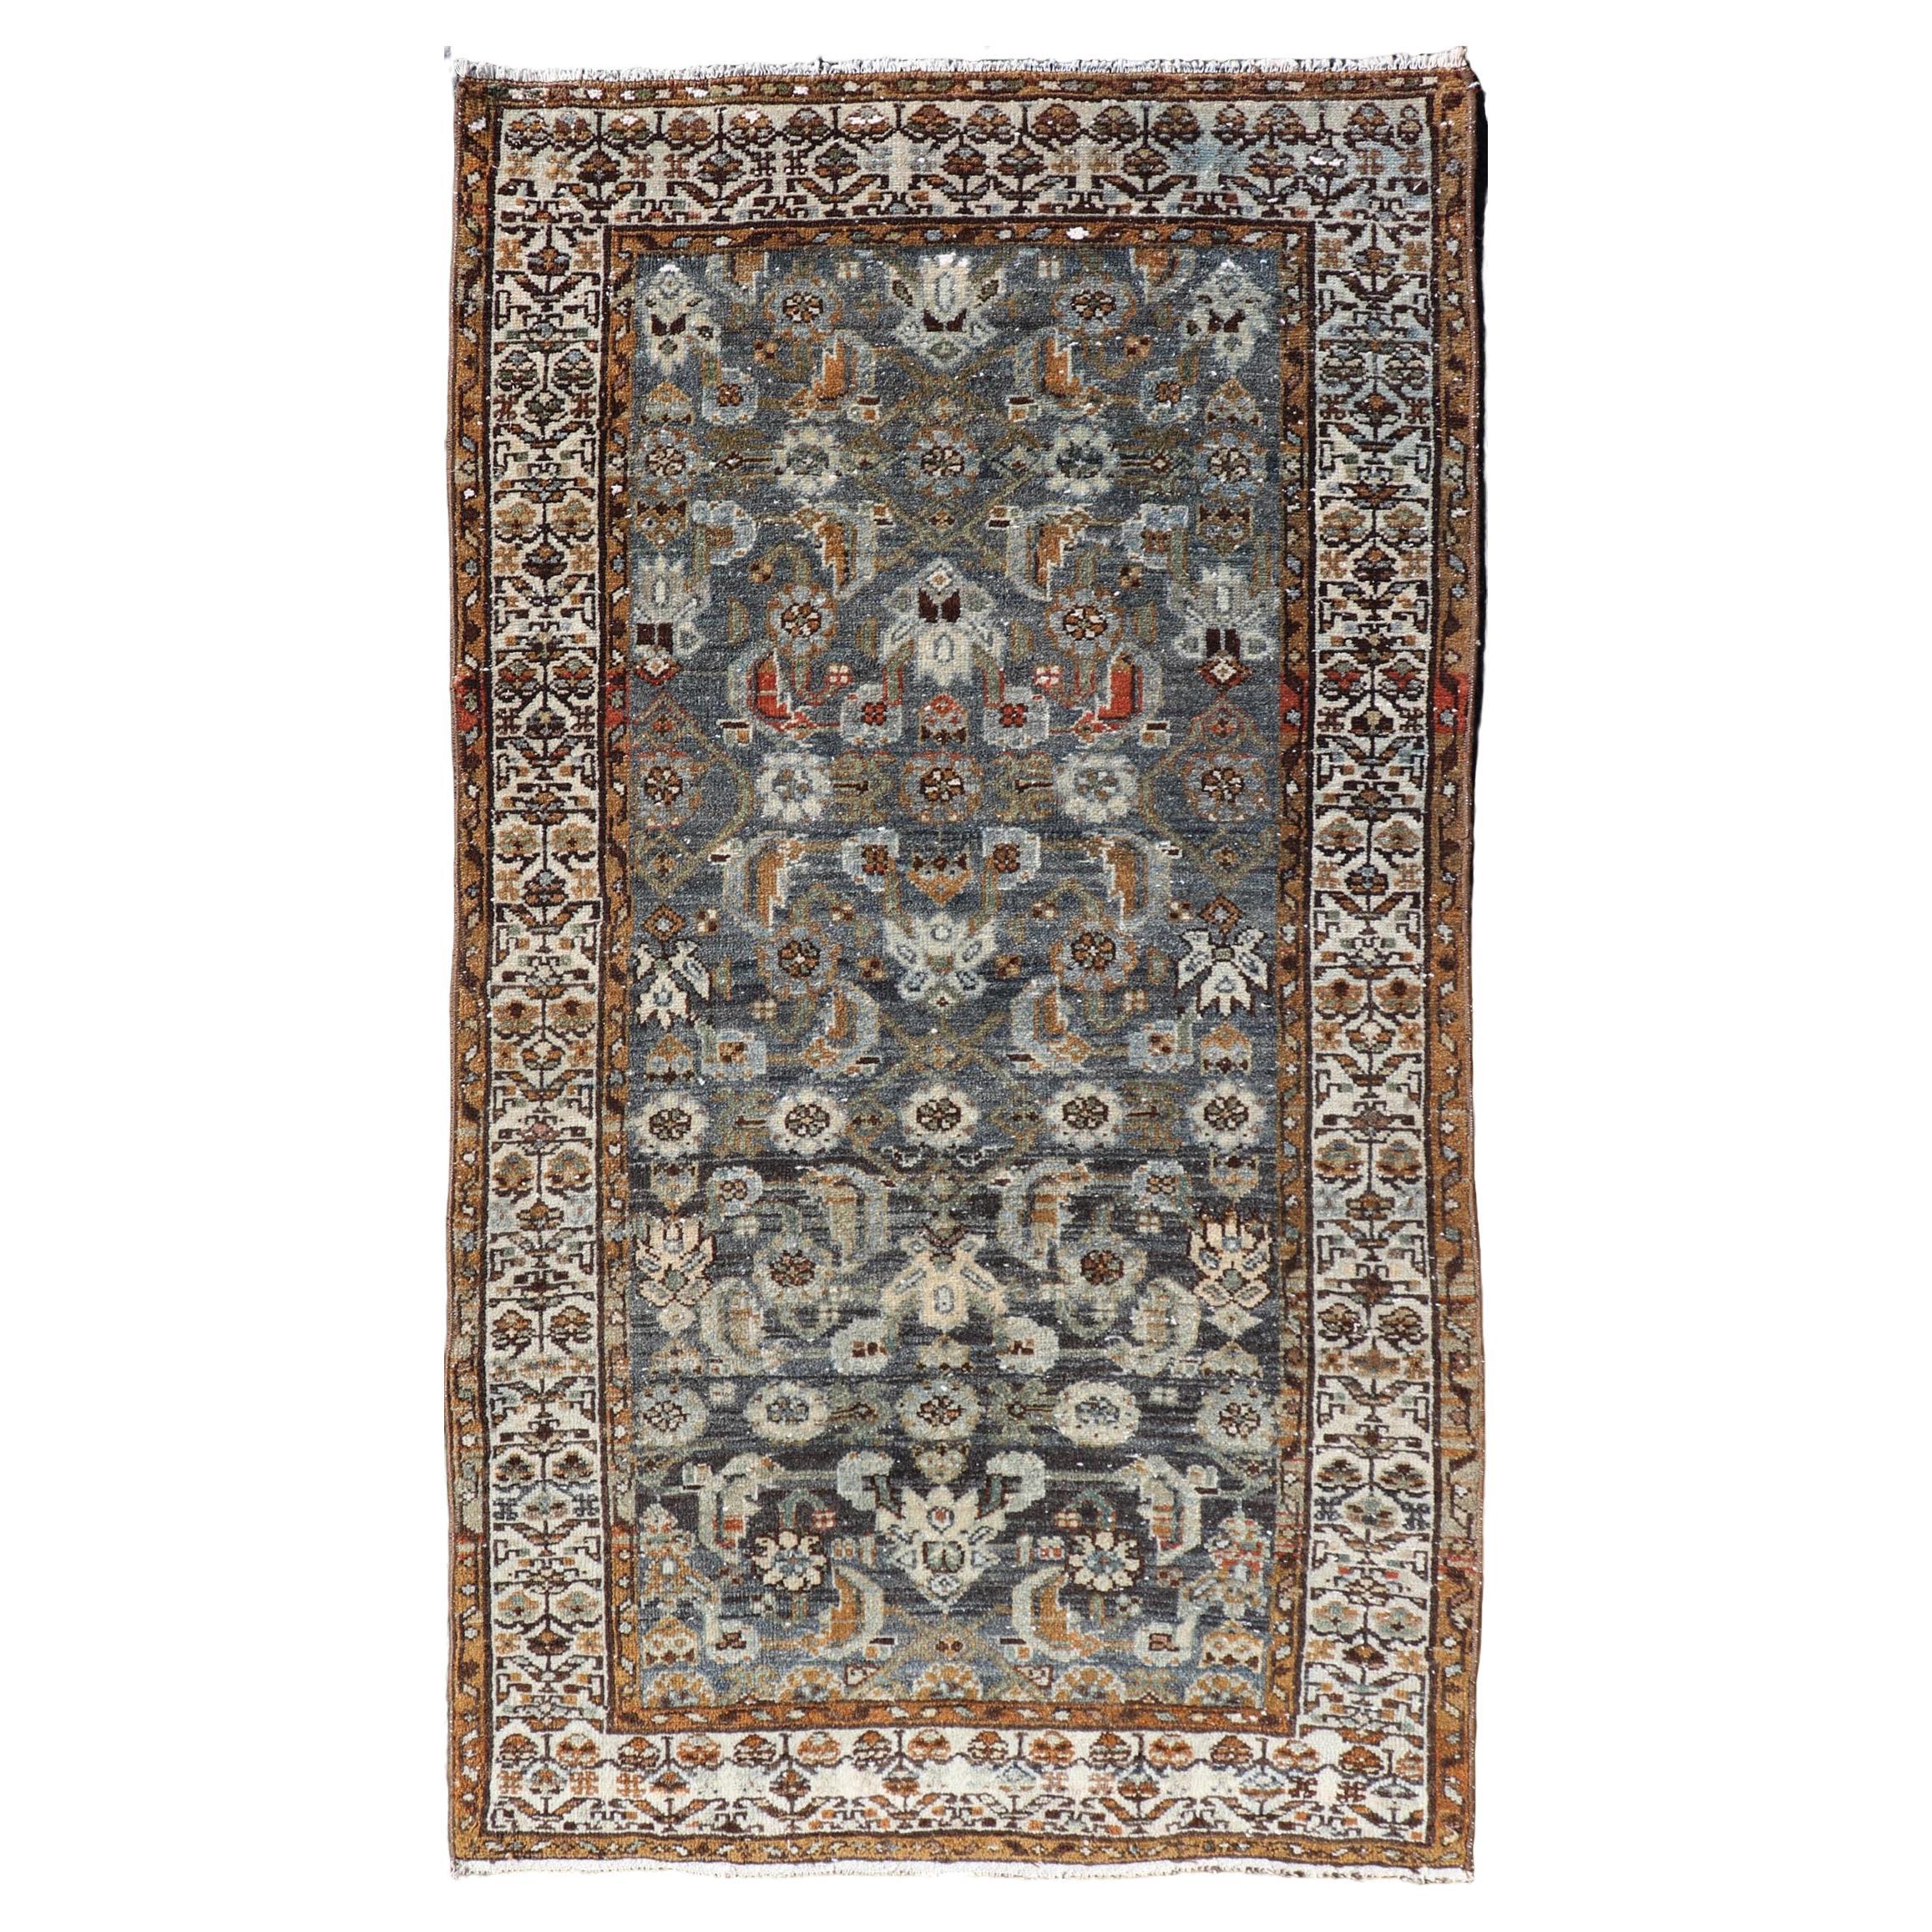 Antique Persian Malayer Rug with All-Over Tribal Design On A Blue Field 